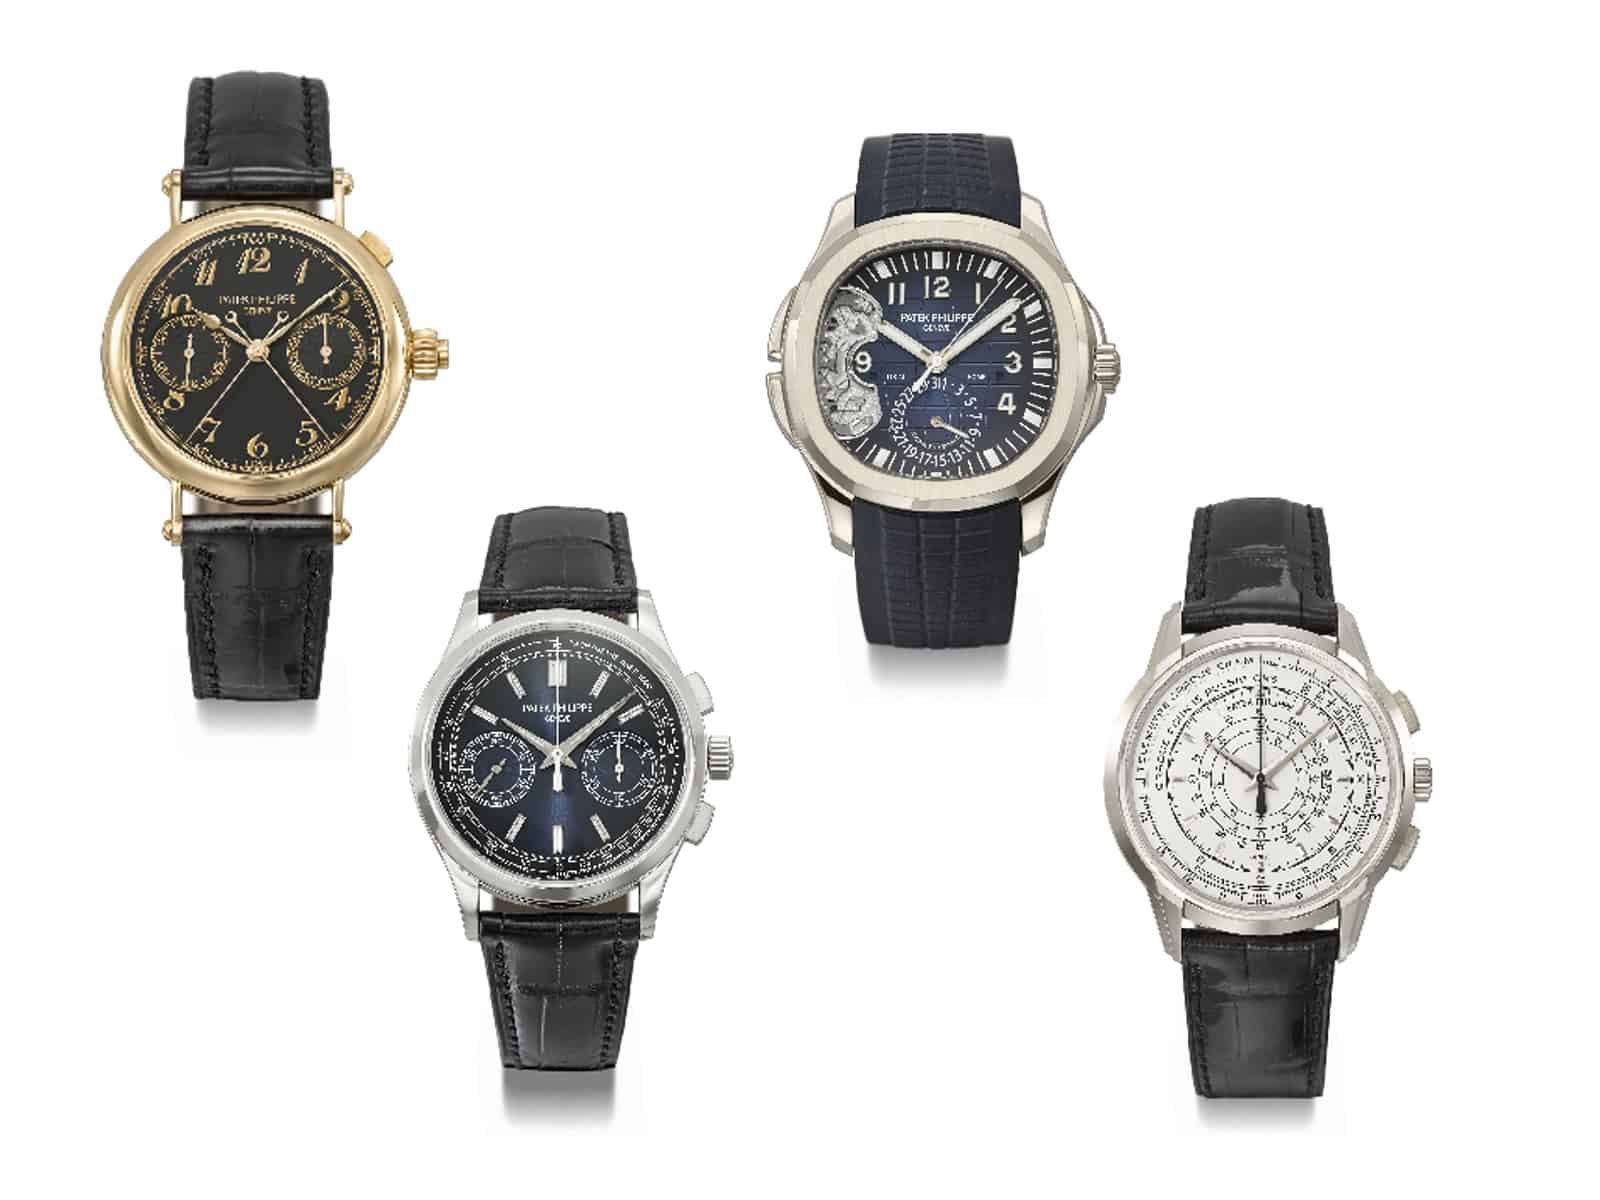 Patek Philippe Limited Editions Auktionsmodelle